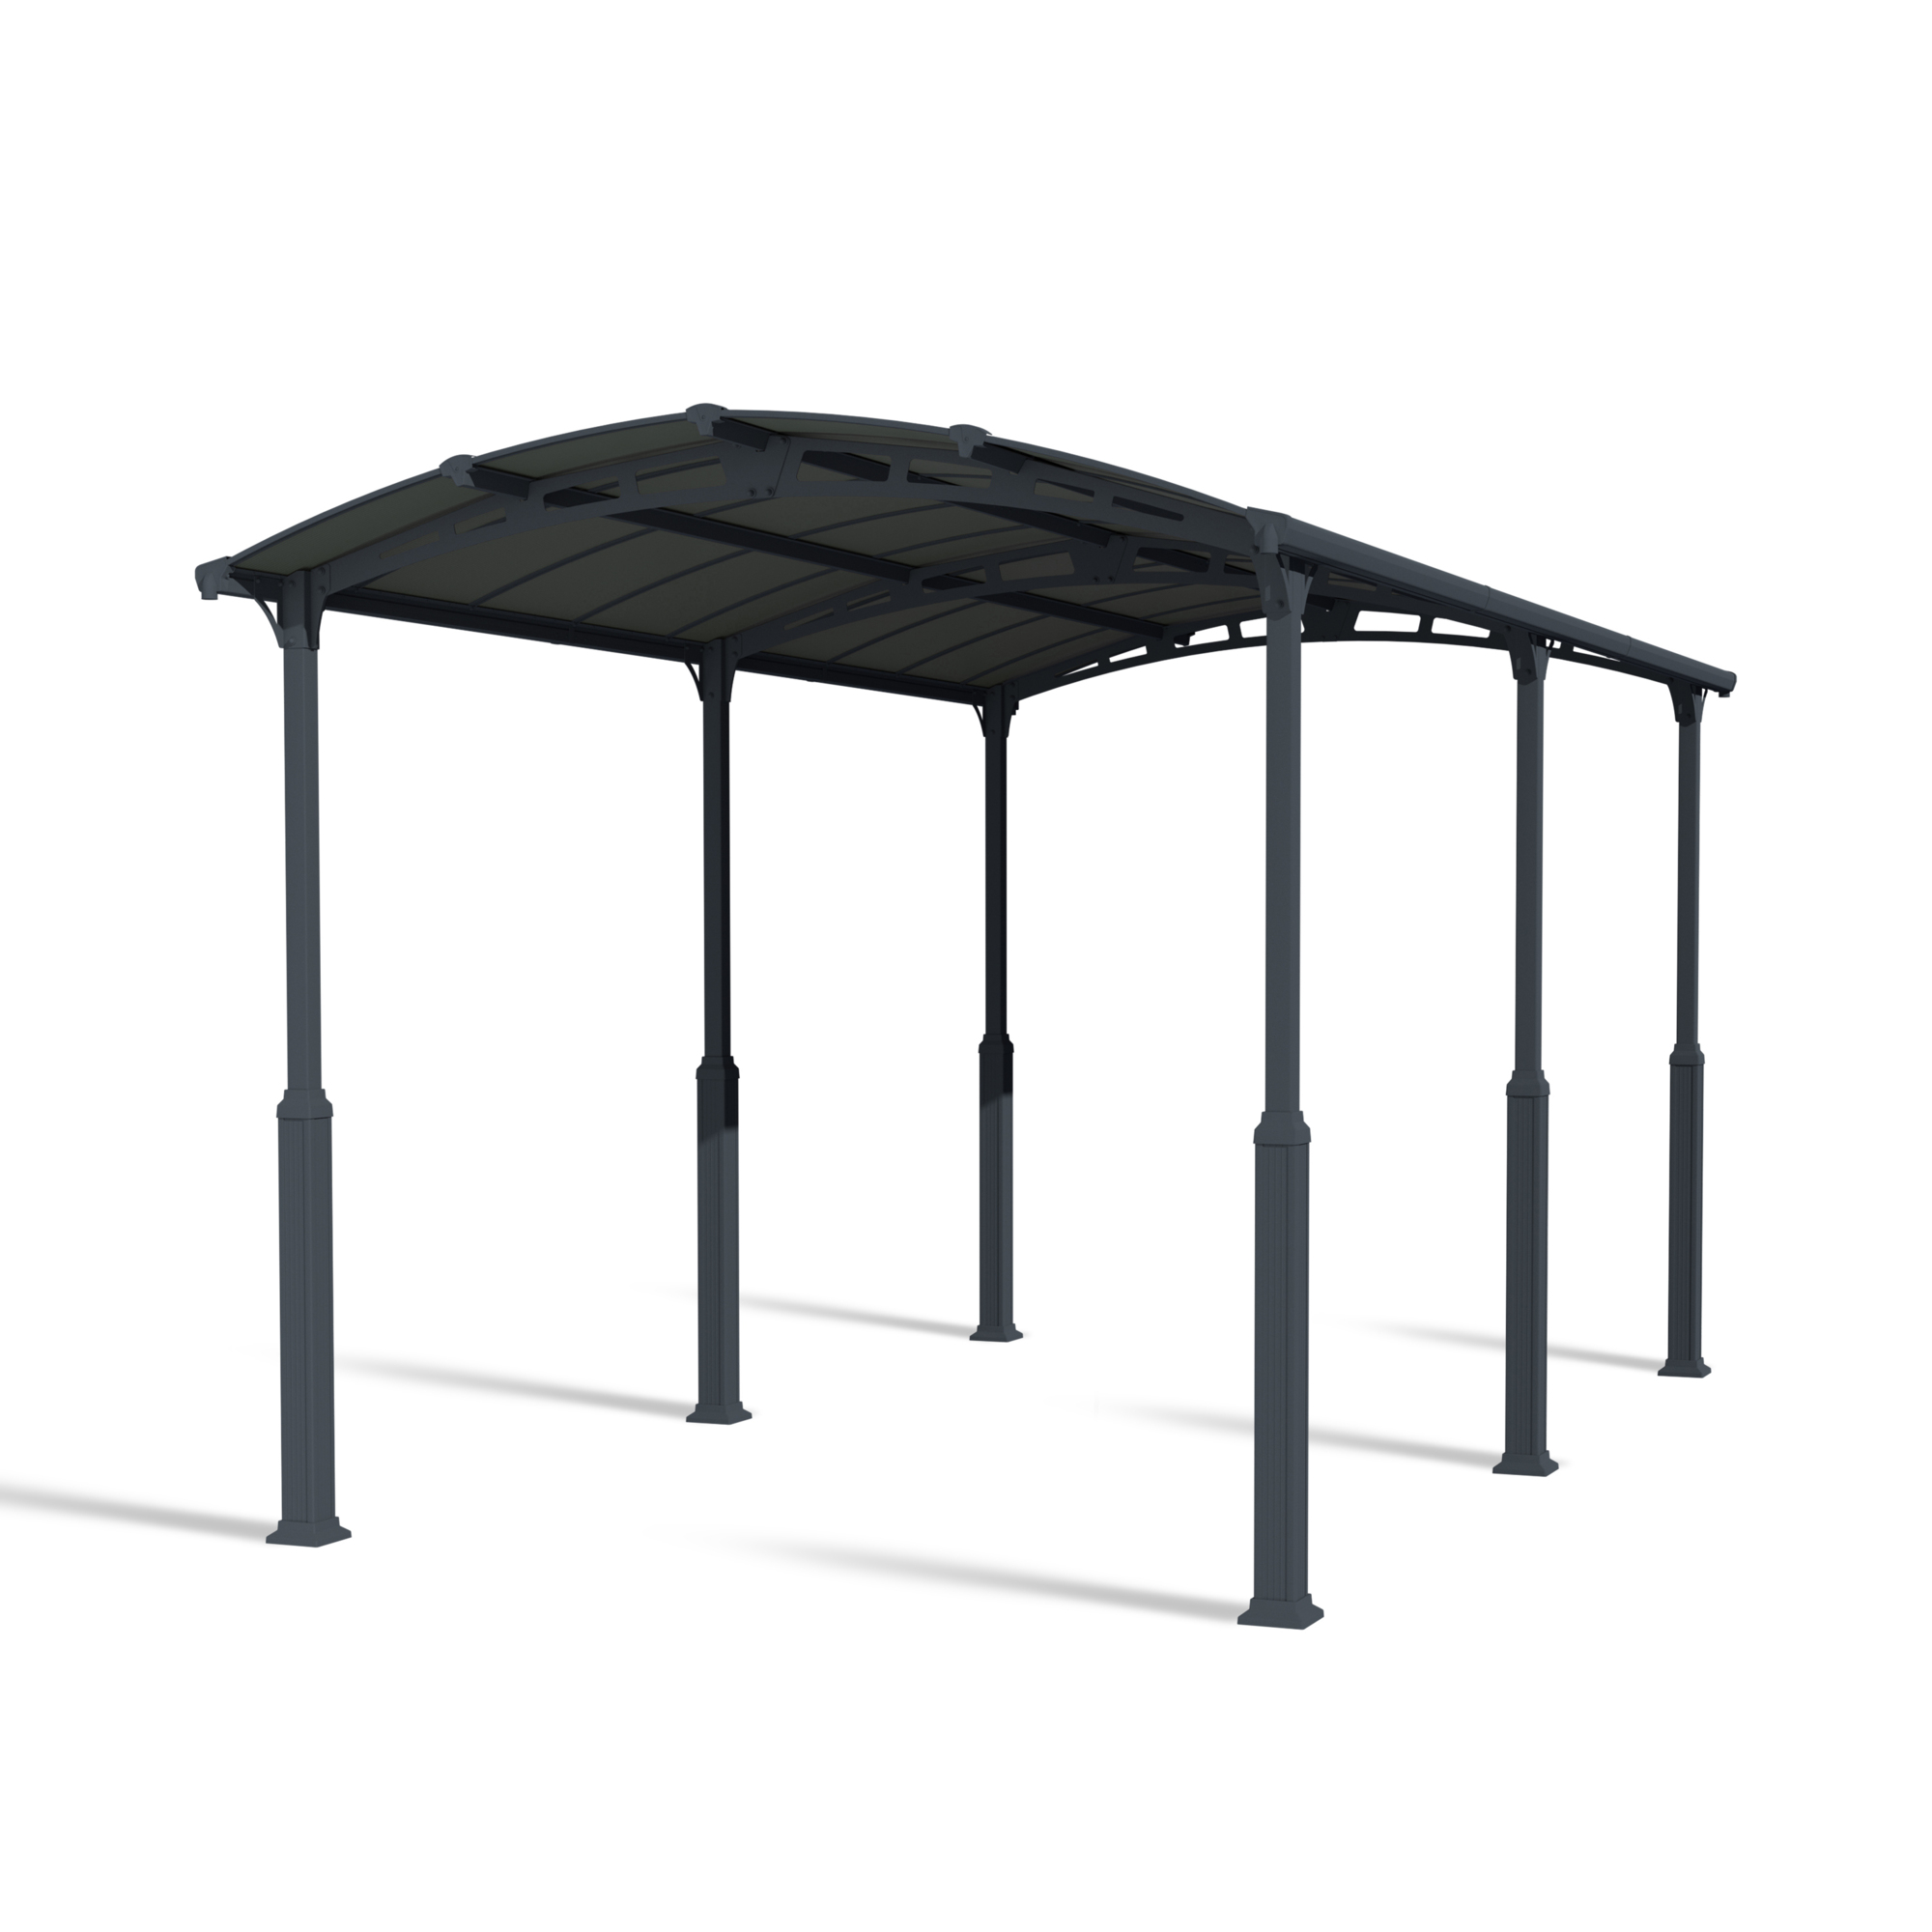 Poly-Tex Inc., Palram - Canopia Arcadia Alpine 12ft. x 28ft. Carport, Width 88.5 in, Height 30.7086 in, Cover Material Polycarbonate, Model 705915